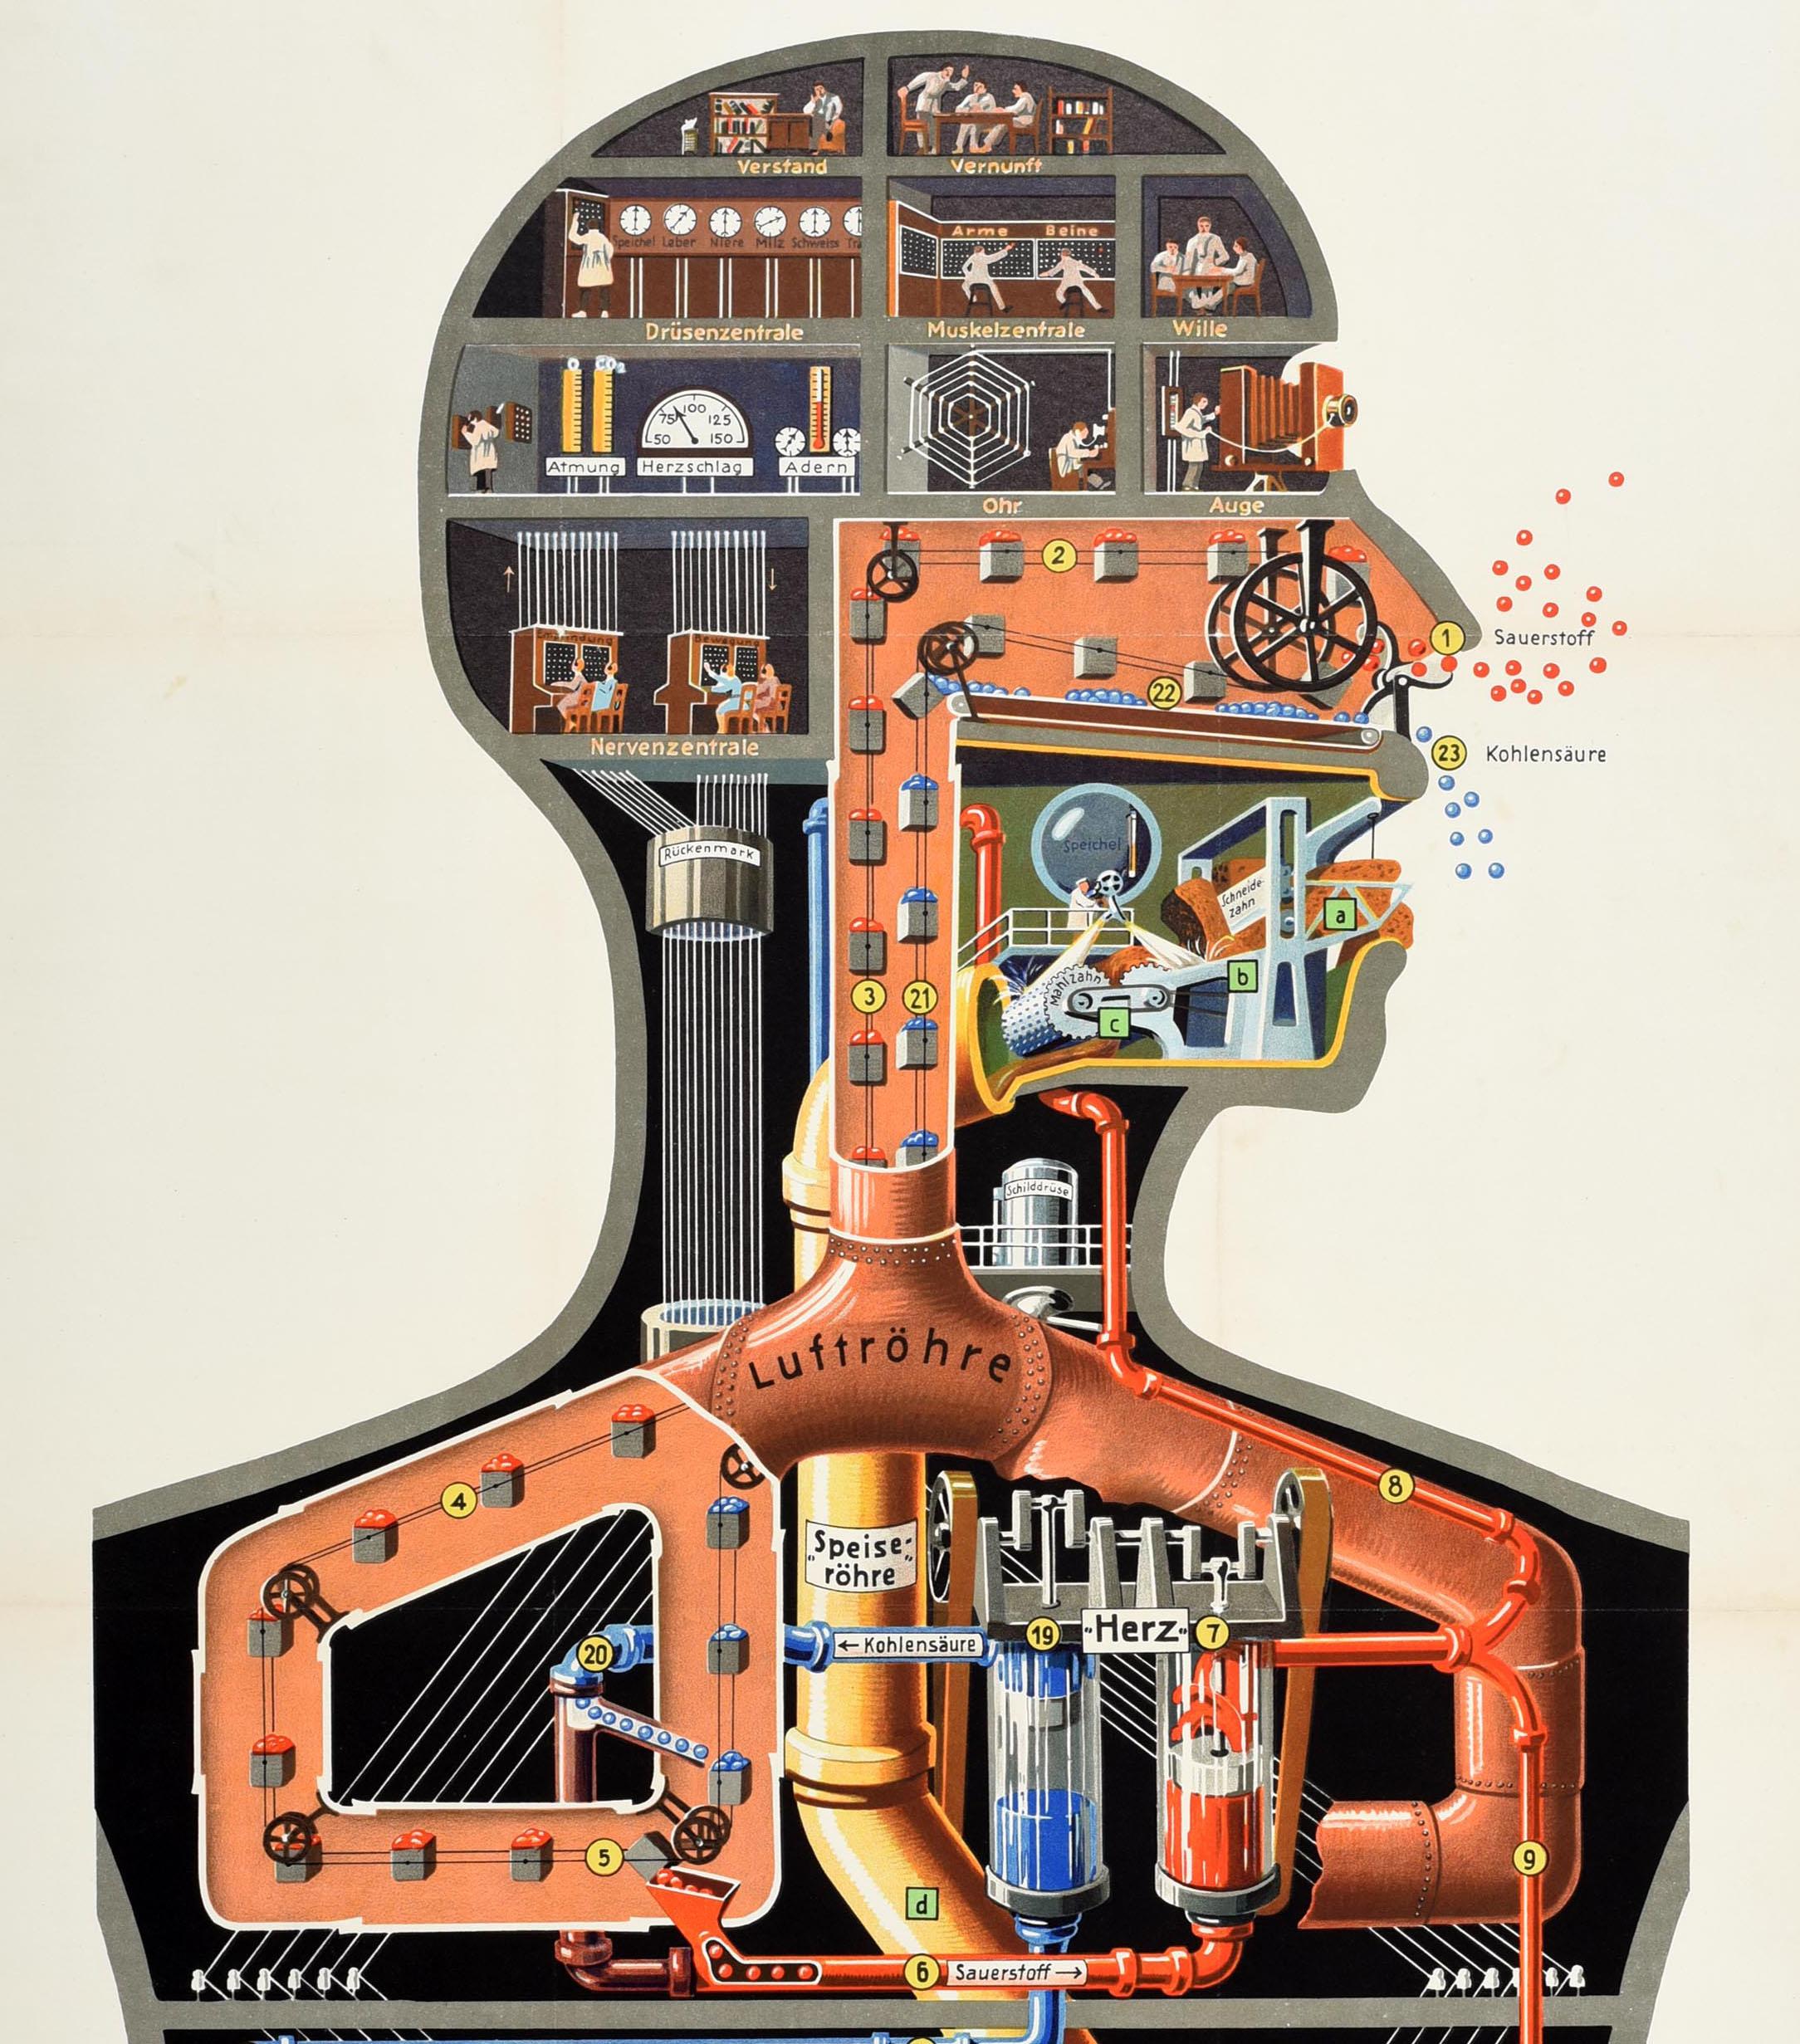 Original vintage poster for the graphic analogy - Der Mensch Als Industriepalast / Man As Industrial Palace - by the German physician, scientist and illustrator Fritz Kahn (1888-1968). Fantastic industrial design featuring a human torso with the